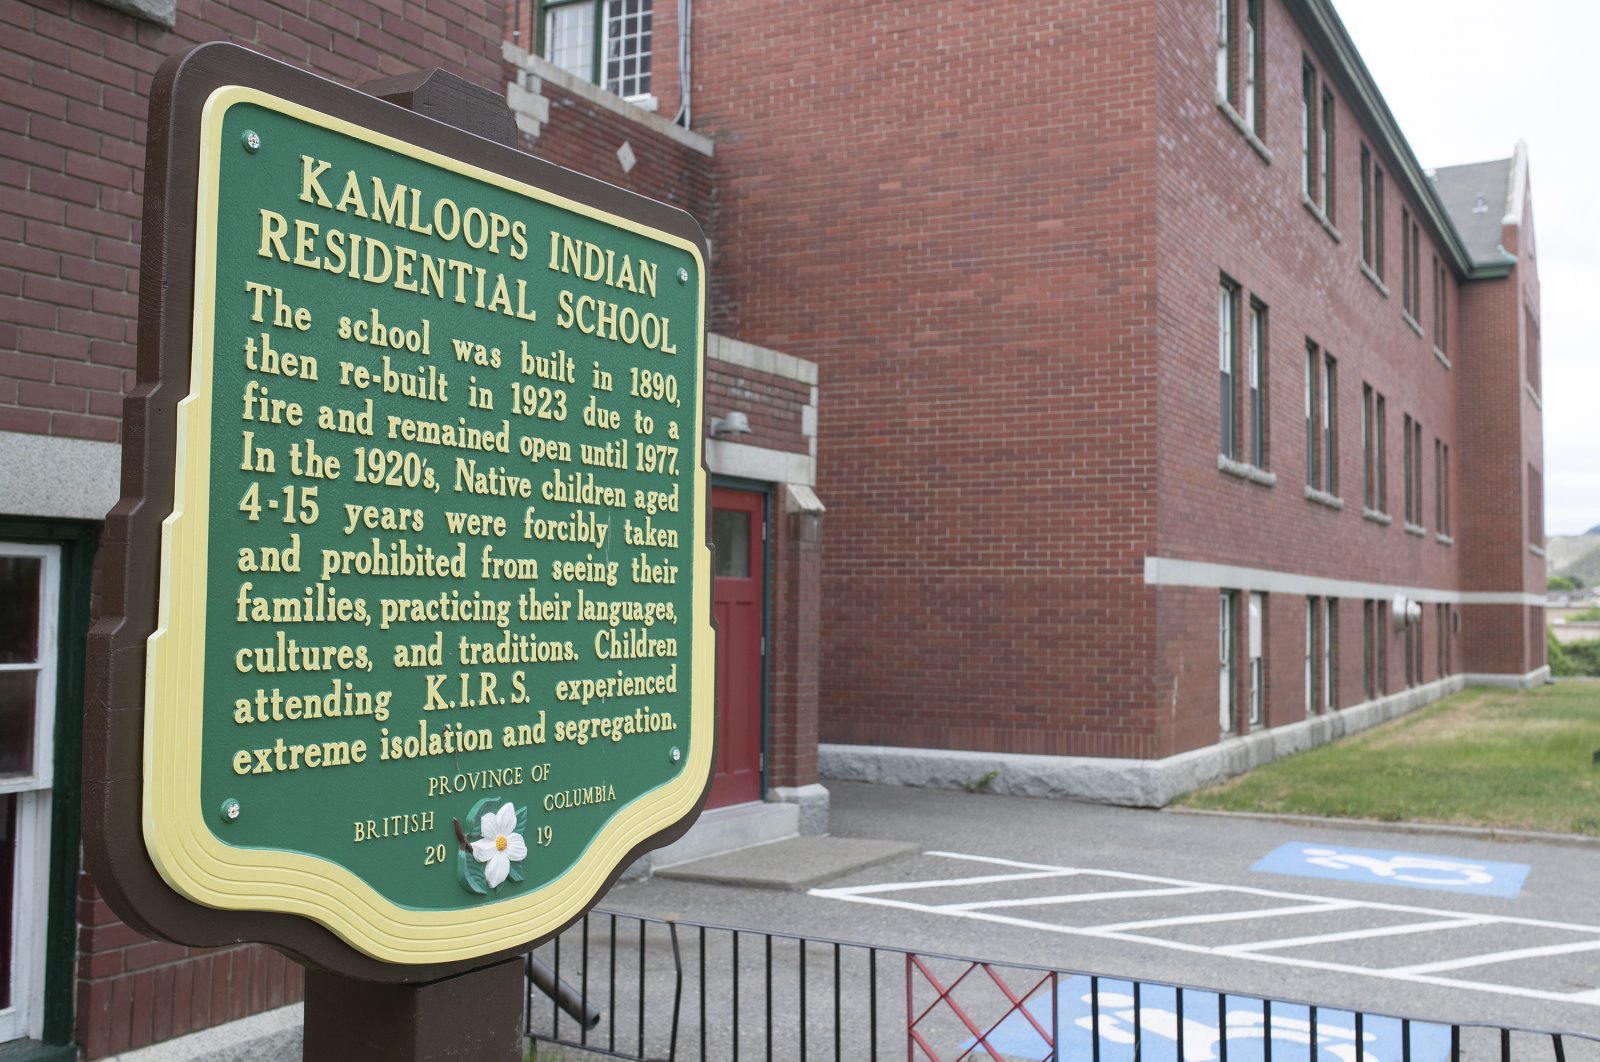 A plaque is seen outside of the former Kamloops Indian Residential School on Tk'emlups te Secwépemc First Nation in Kamloops, British Columbia, Canada, May 27, 2021. (AP Photo)